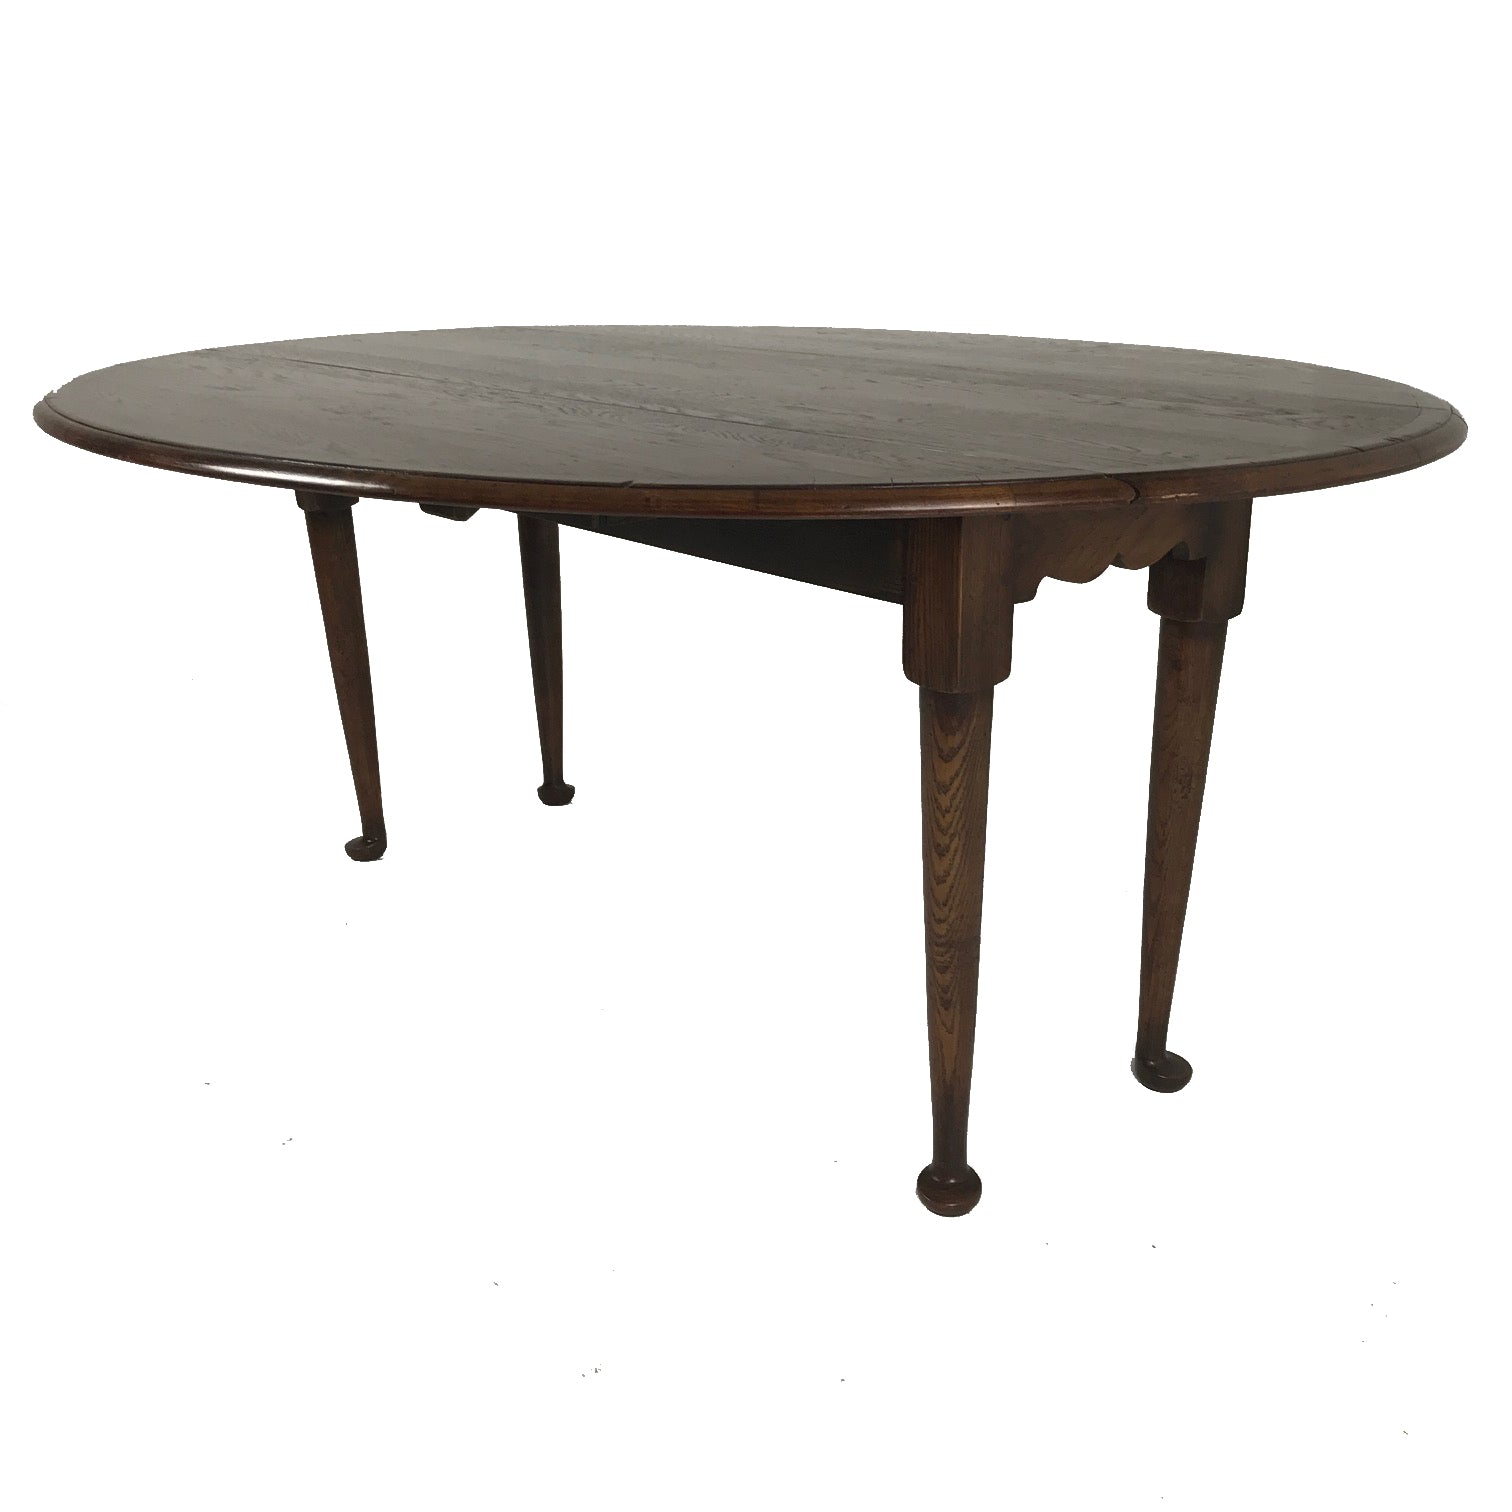 English Replica Padfoot Dropleaf Table